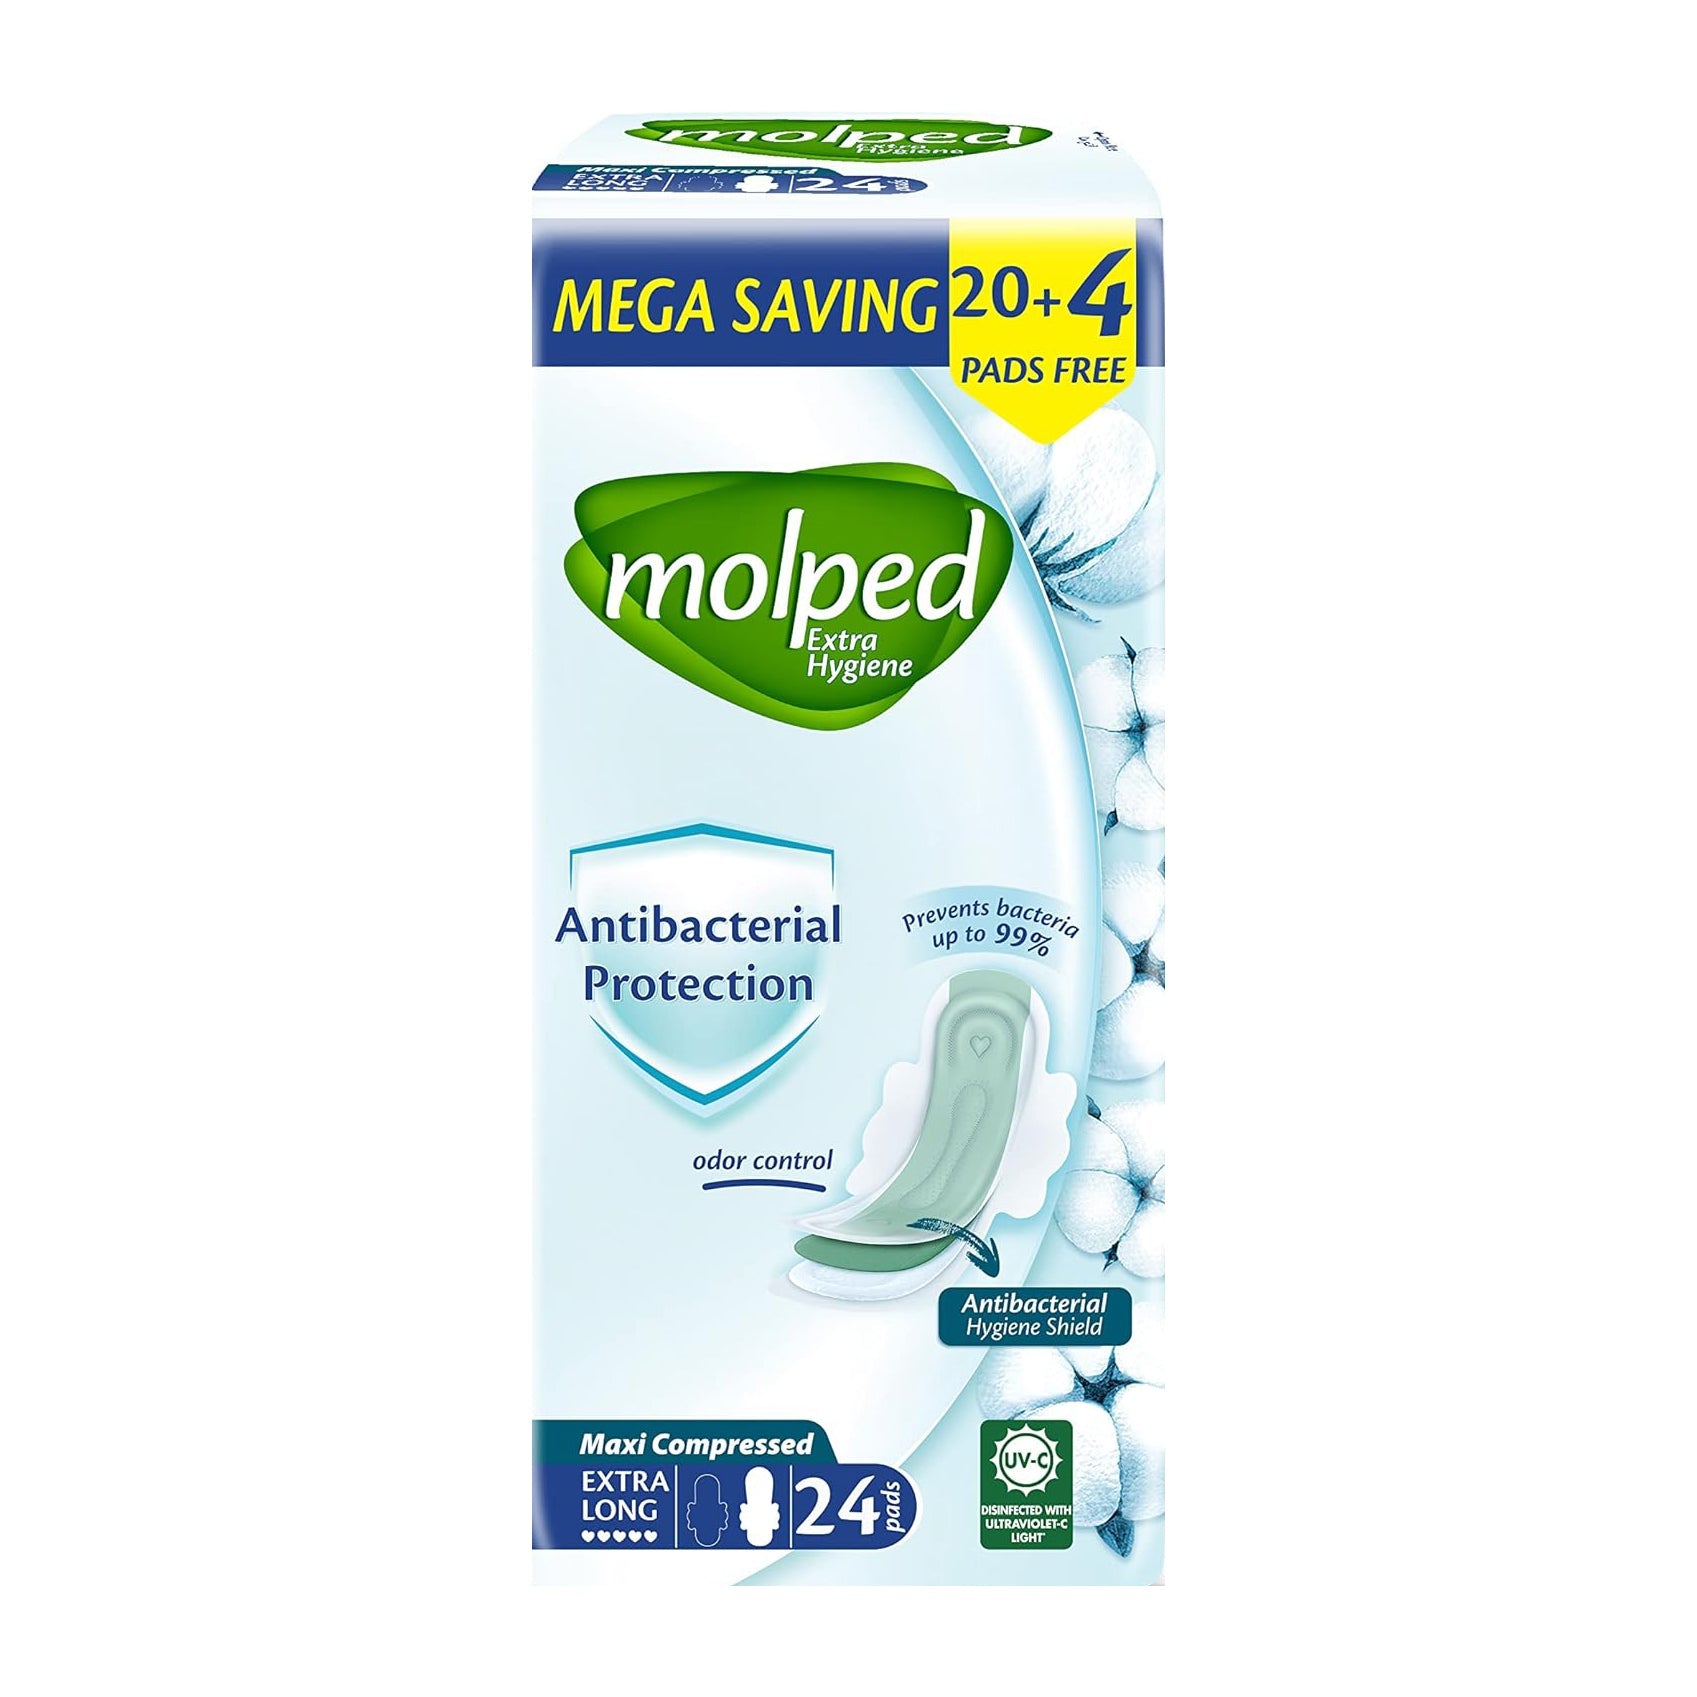 Molped Mega Saving Maxi Compressed Extra Long Pads - 24 Pads - Bloom Pharmacy